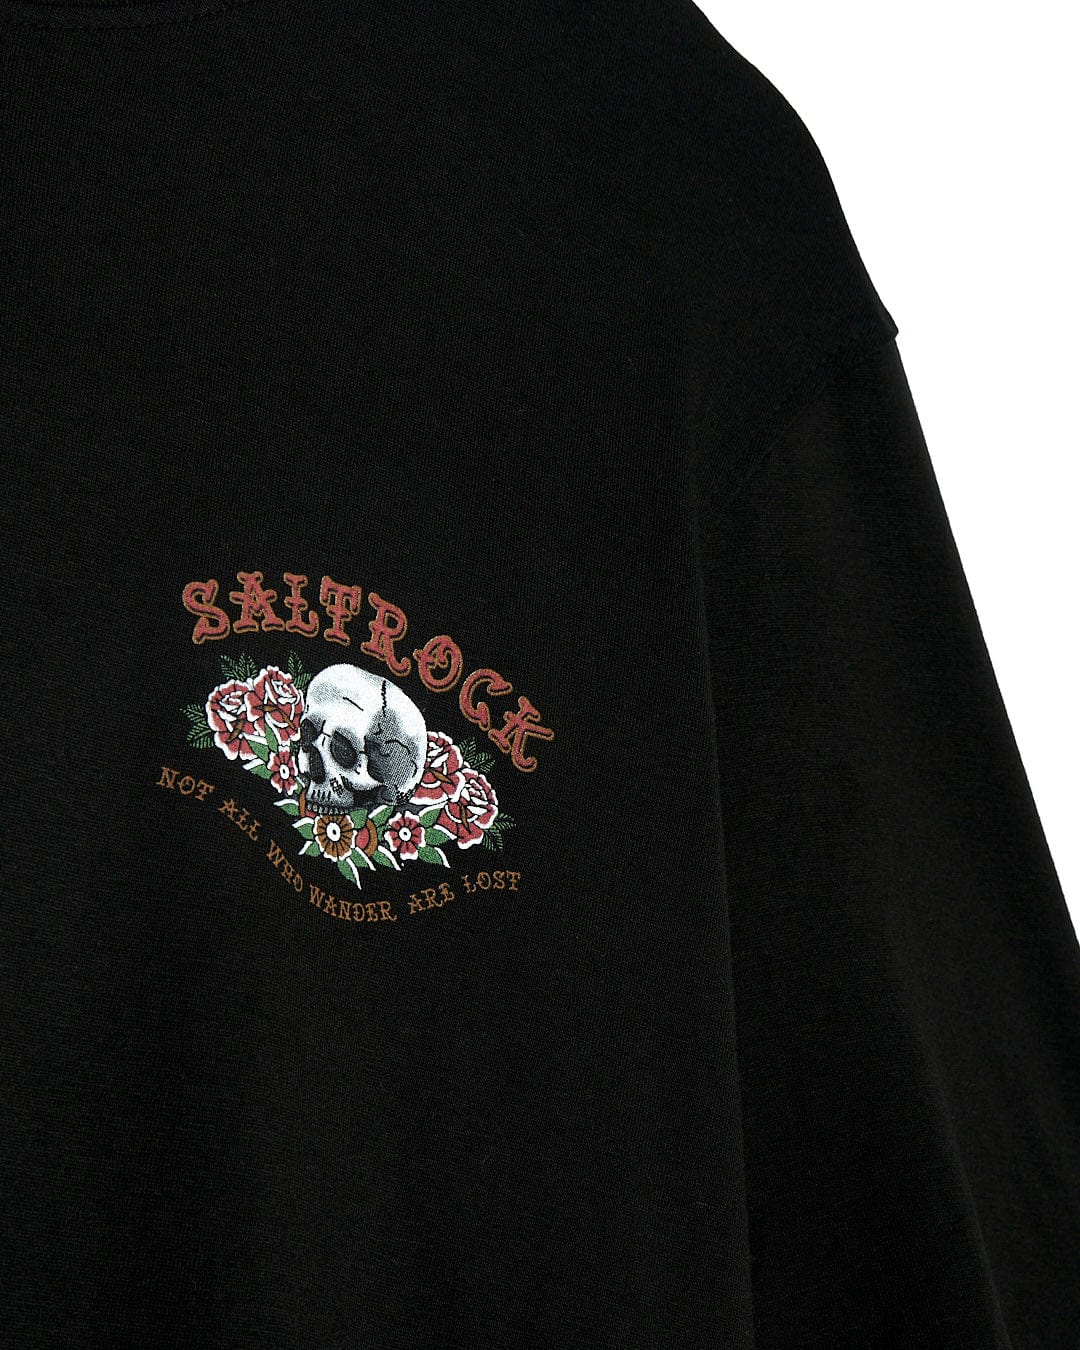 A Saltrock Tattoo Island 2 - Mens Short Sleeve T-Shirt - Black with a skull and roses on it.